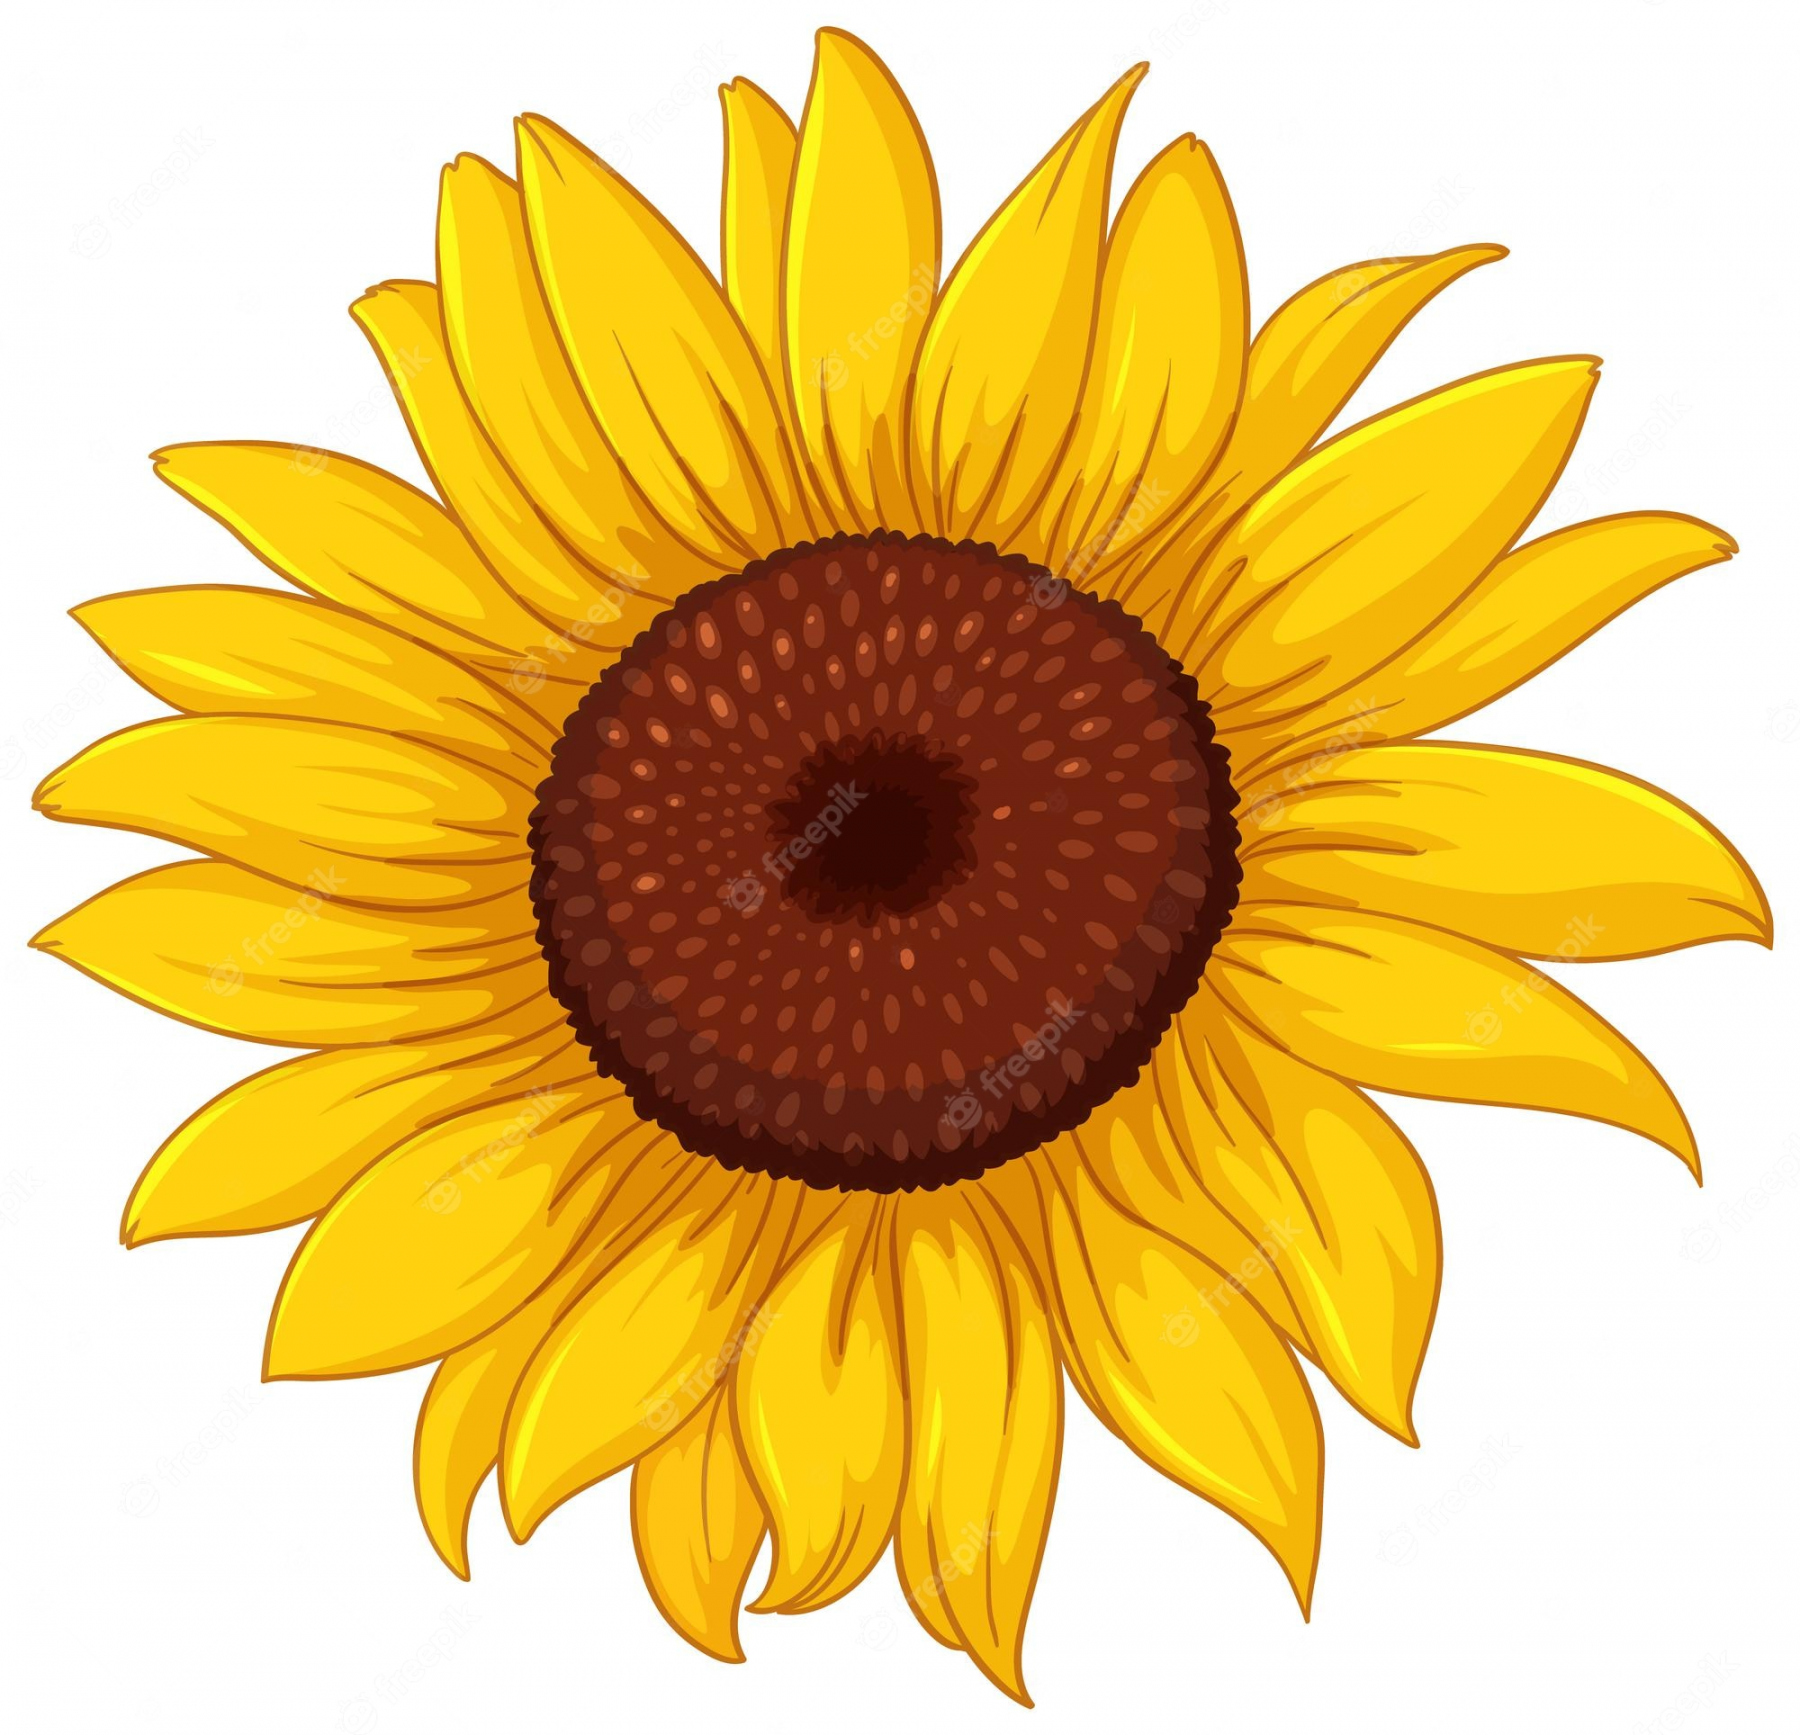 Sunflower Clip Art Images - Free Download on Freepik - FREE Printables - Free Printable Sunflower Images